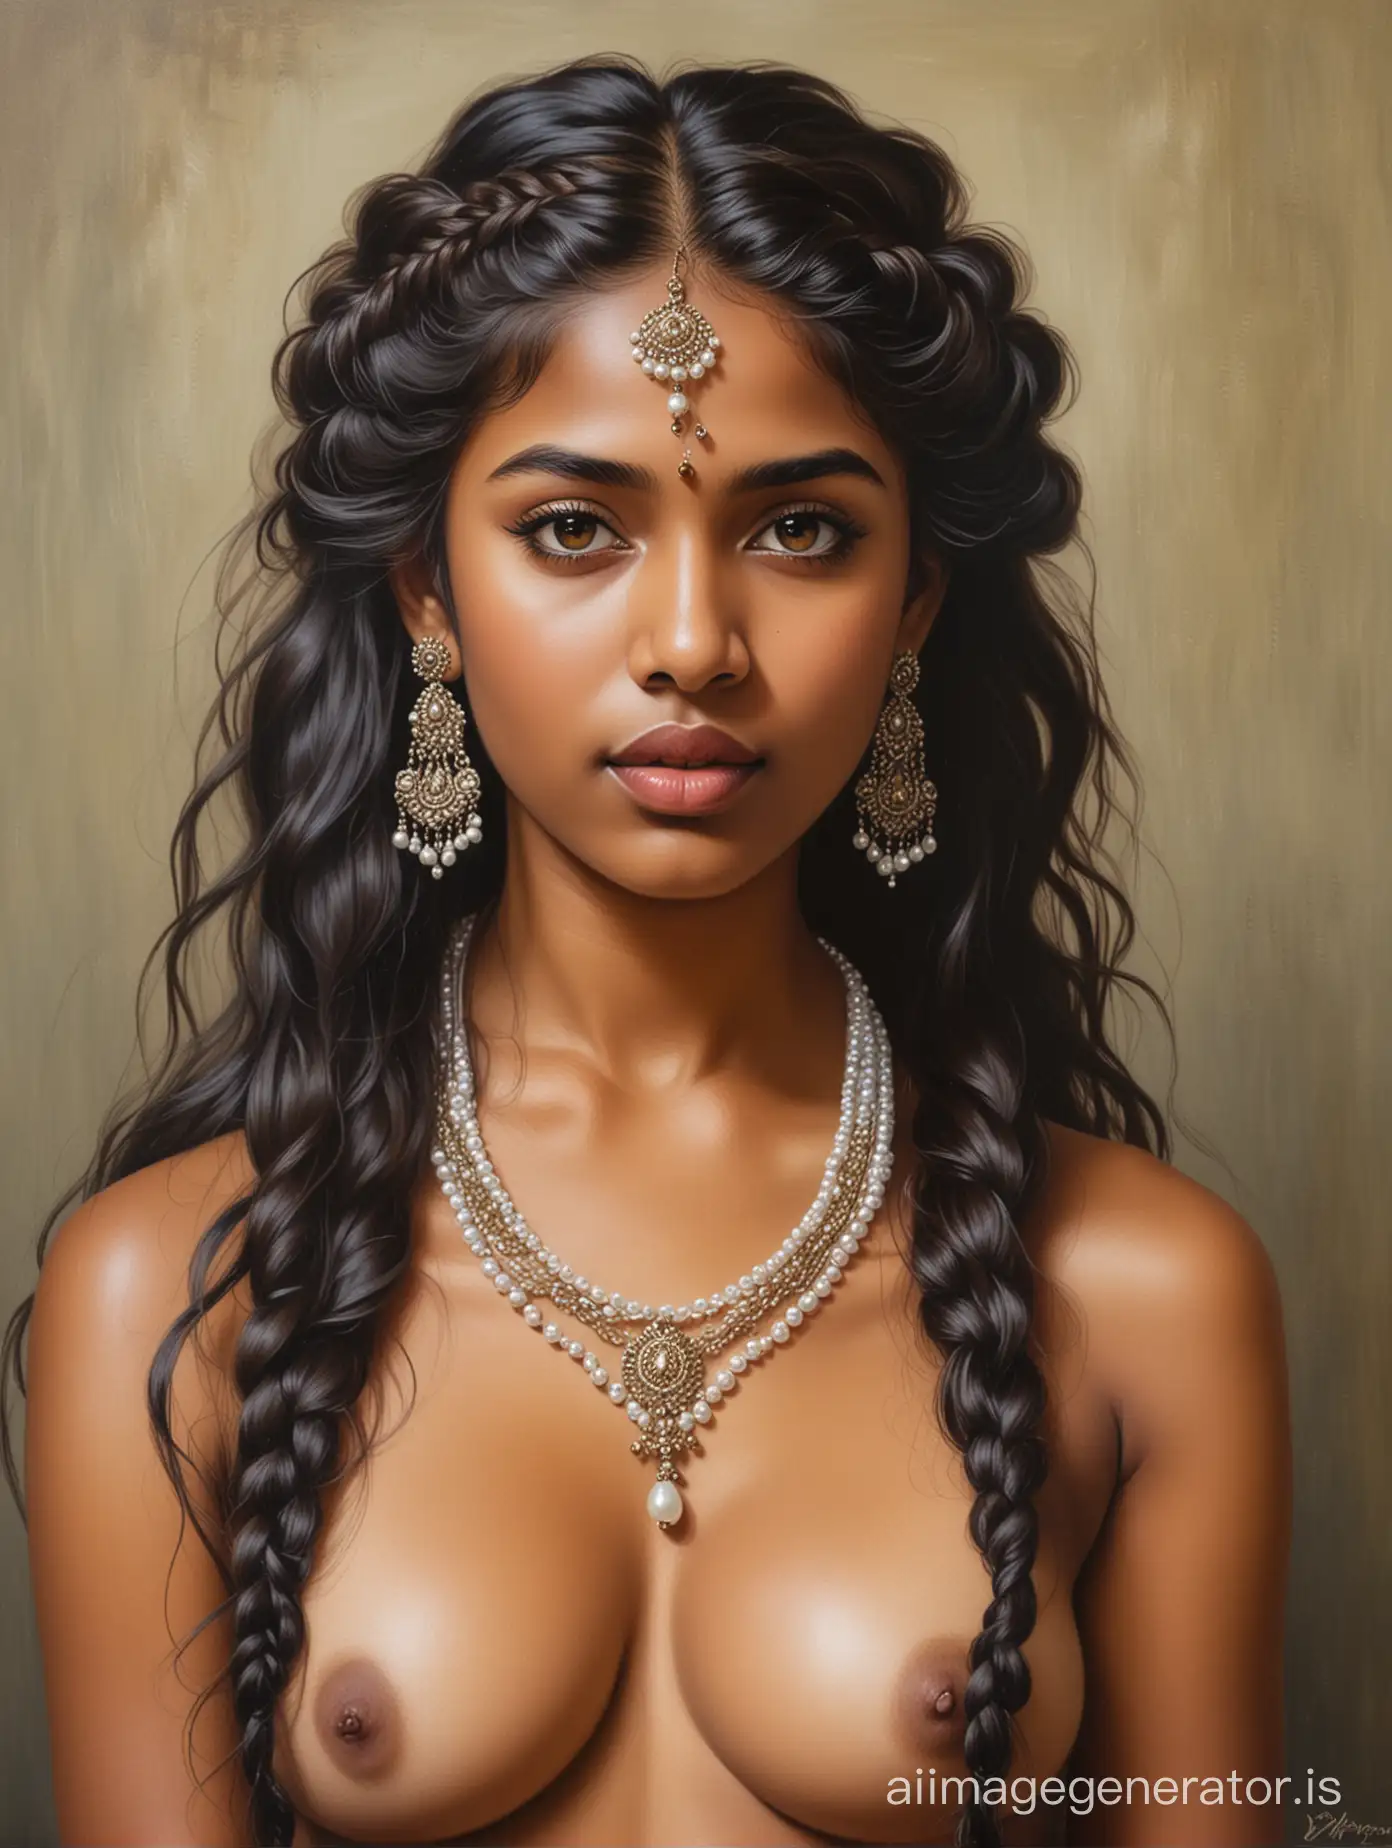 Cole front view oil painting of an extraordinarily beautiful nude Tamil princess with long flowing braided hair wearing pearls